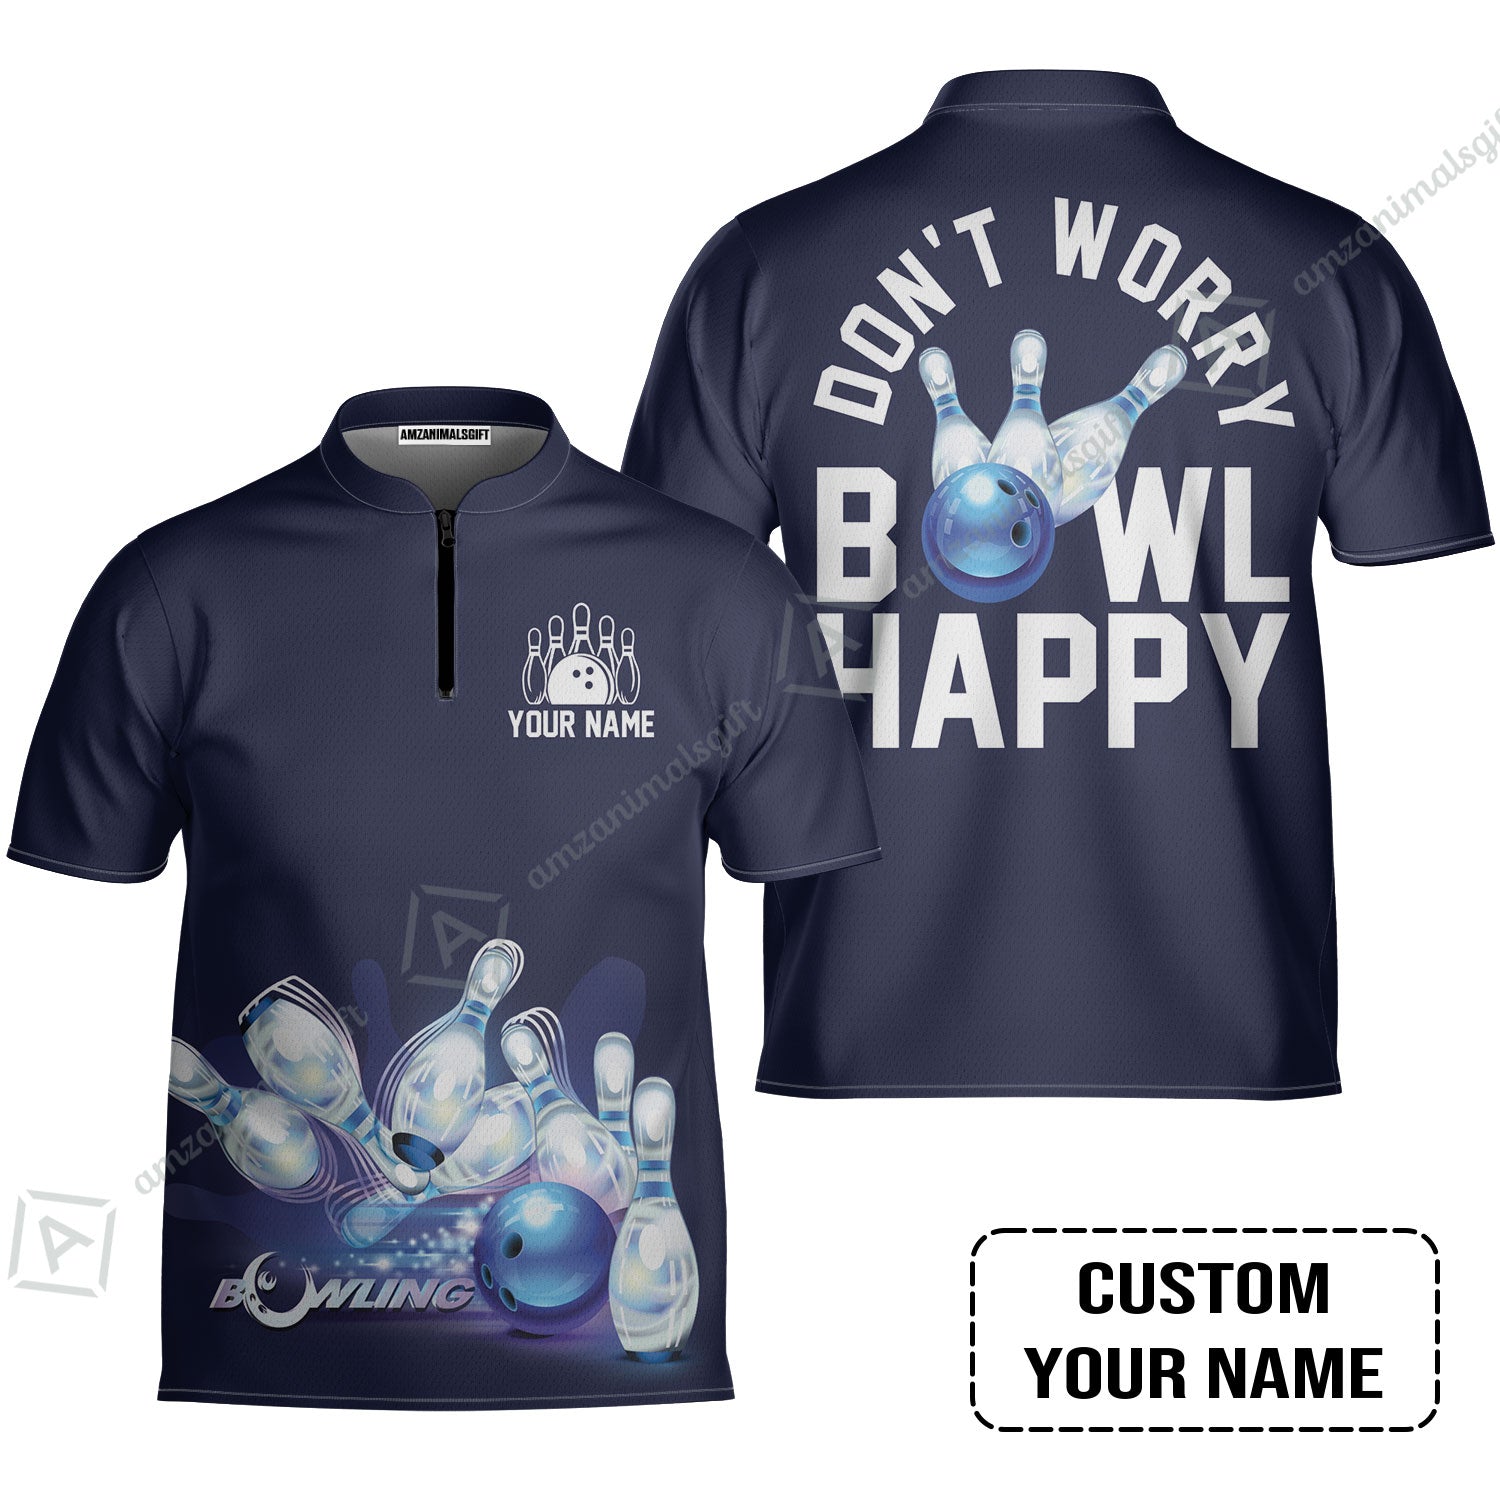 Bowling Jersey Custom Name - Don't Worry Bowl Happy Personalized Bowling Jersey - Gift For Friend, Family, Bowling Lovers